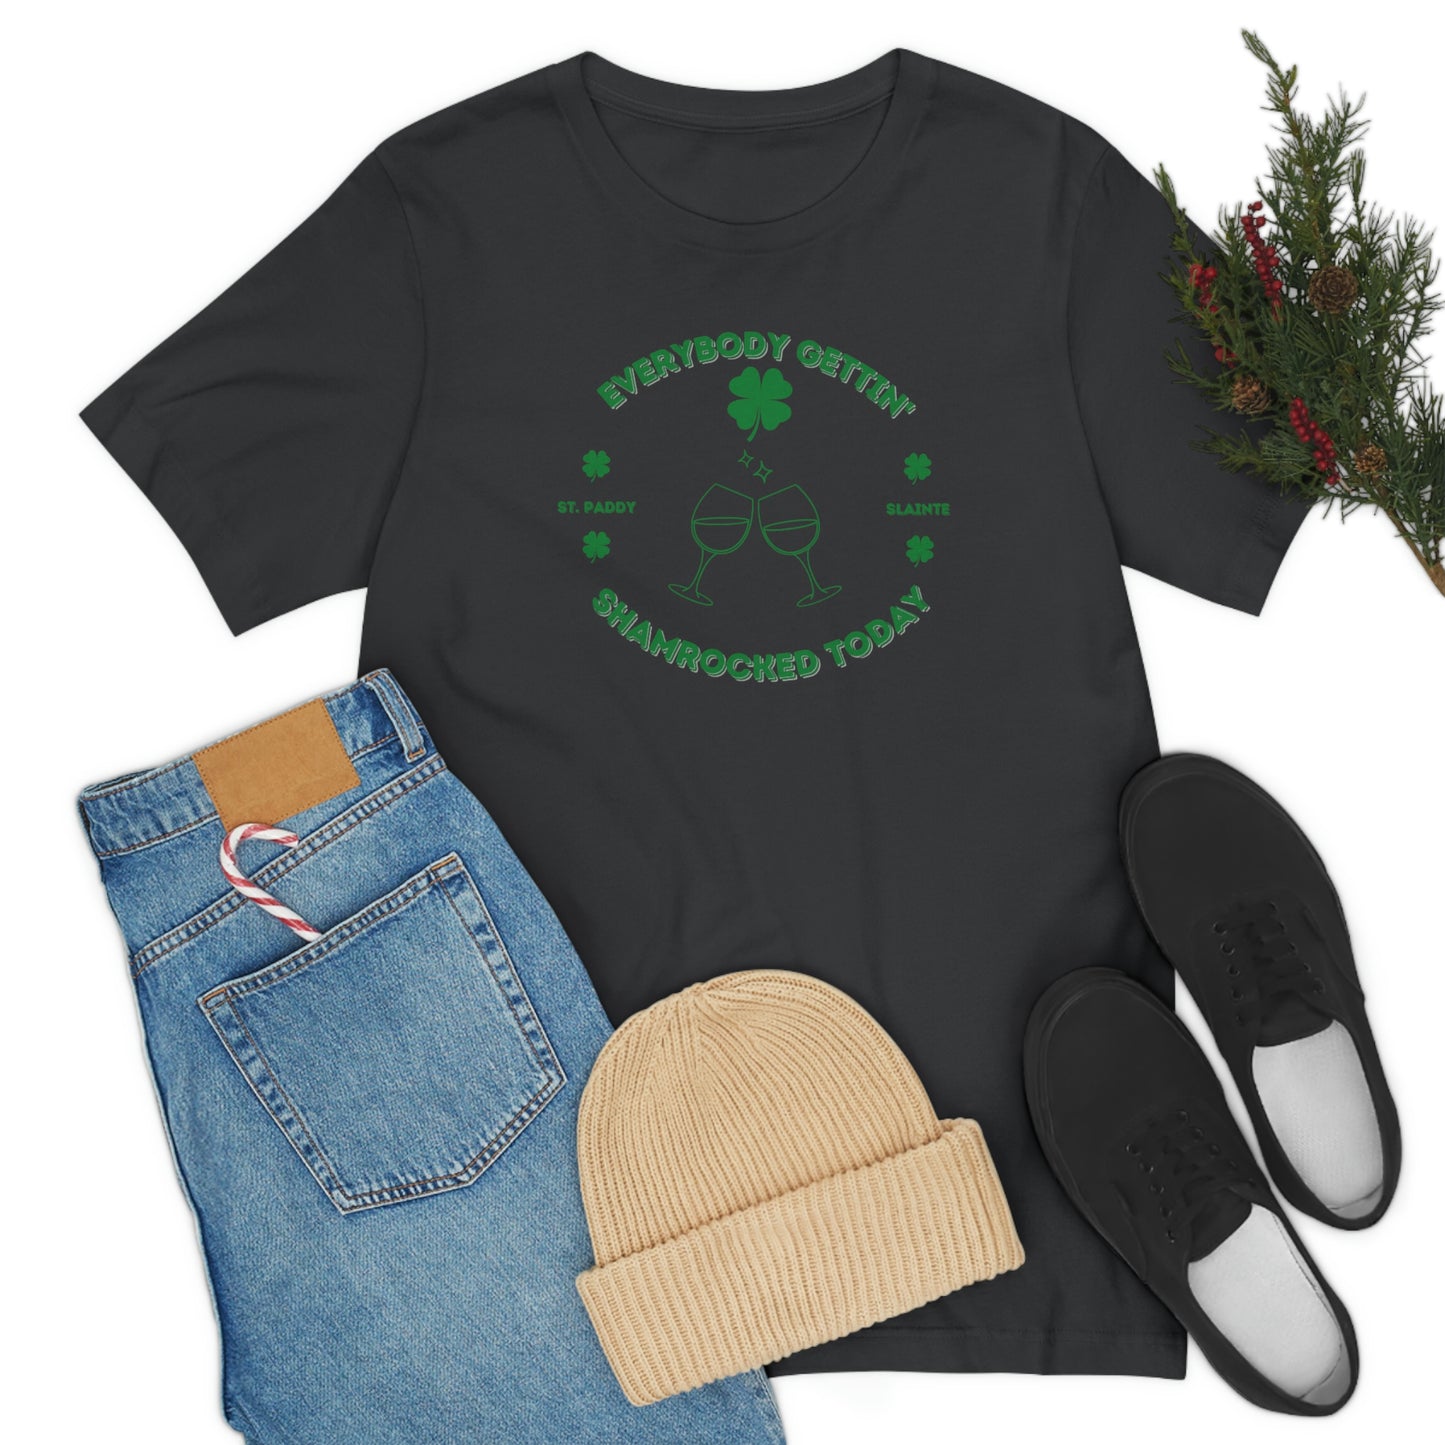 St.  Patrick's Day Women's Tee: Lets Get Rocked !